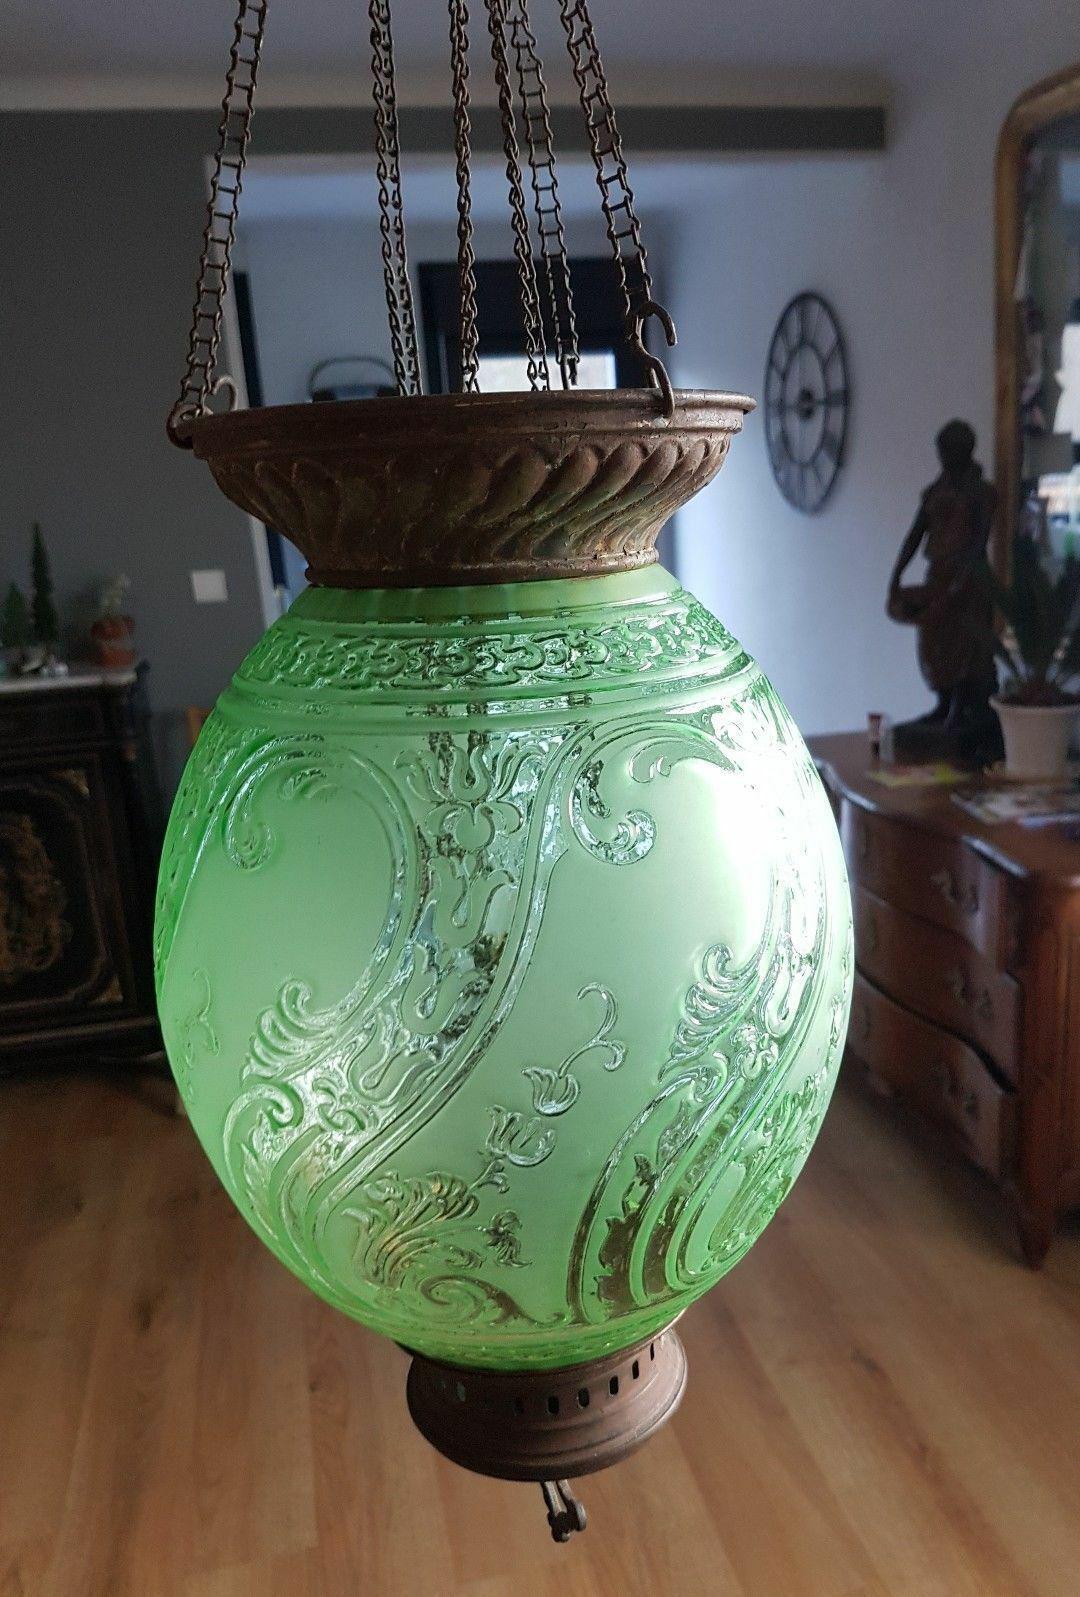 c1890's French Napoleon III Emerald Green Crystal Lantern by Baccarat France. There is documentation of this style of Baccarat oil converted to electric Lanterns.